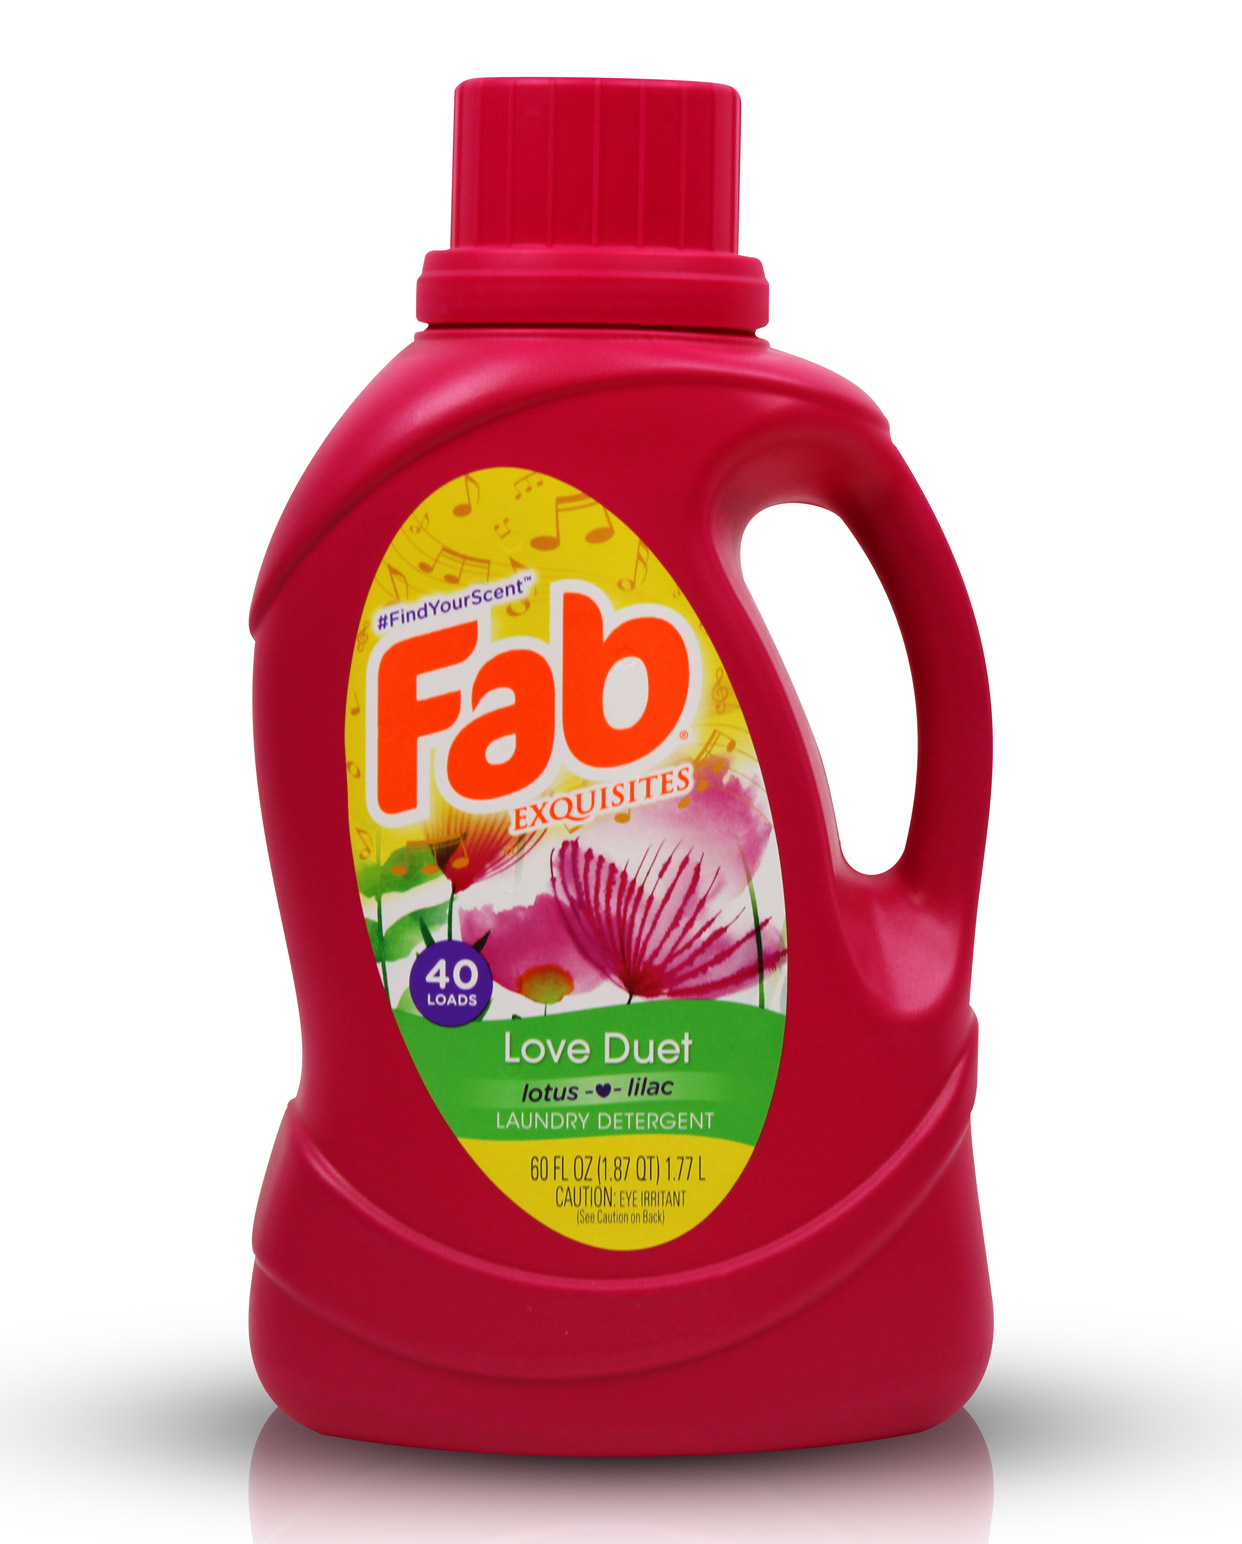 60oz bottle of FAB Floral Scented Laundry Detergent Love Duet